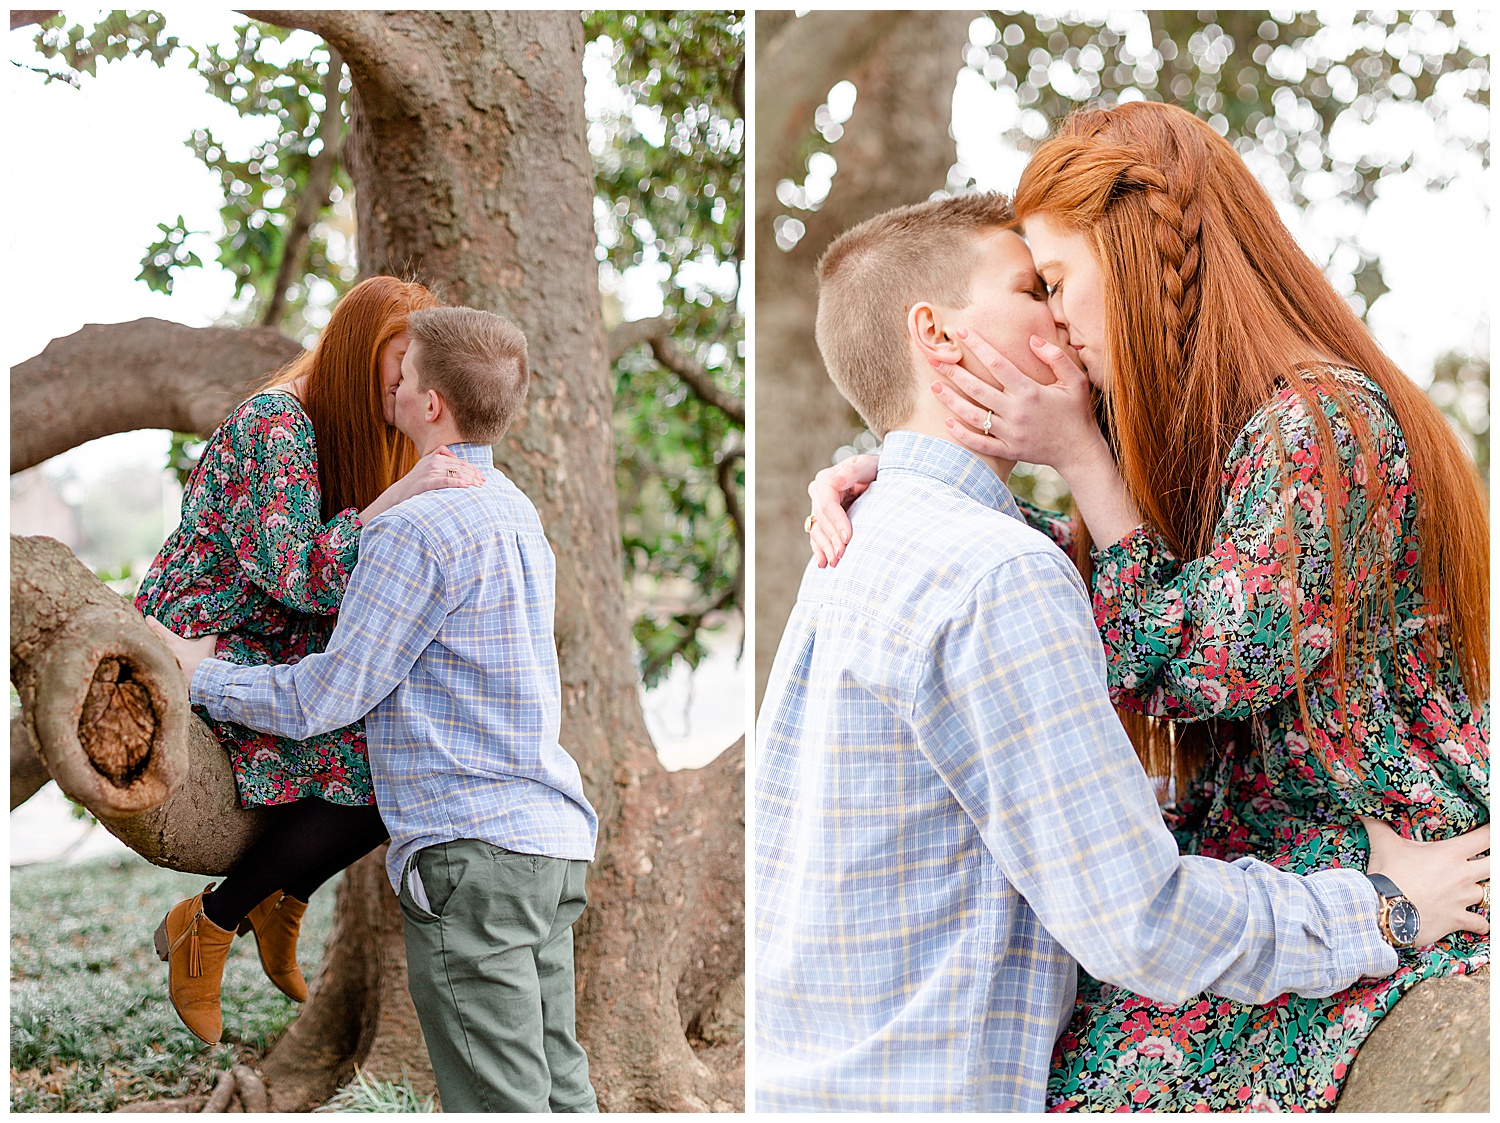 A couple sharing a kiss in a magnolia tree during their spring engagement photos.